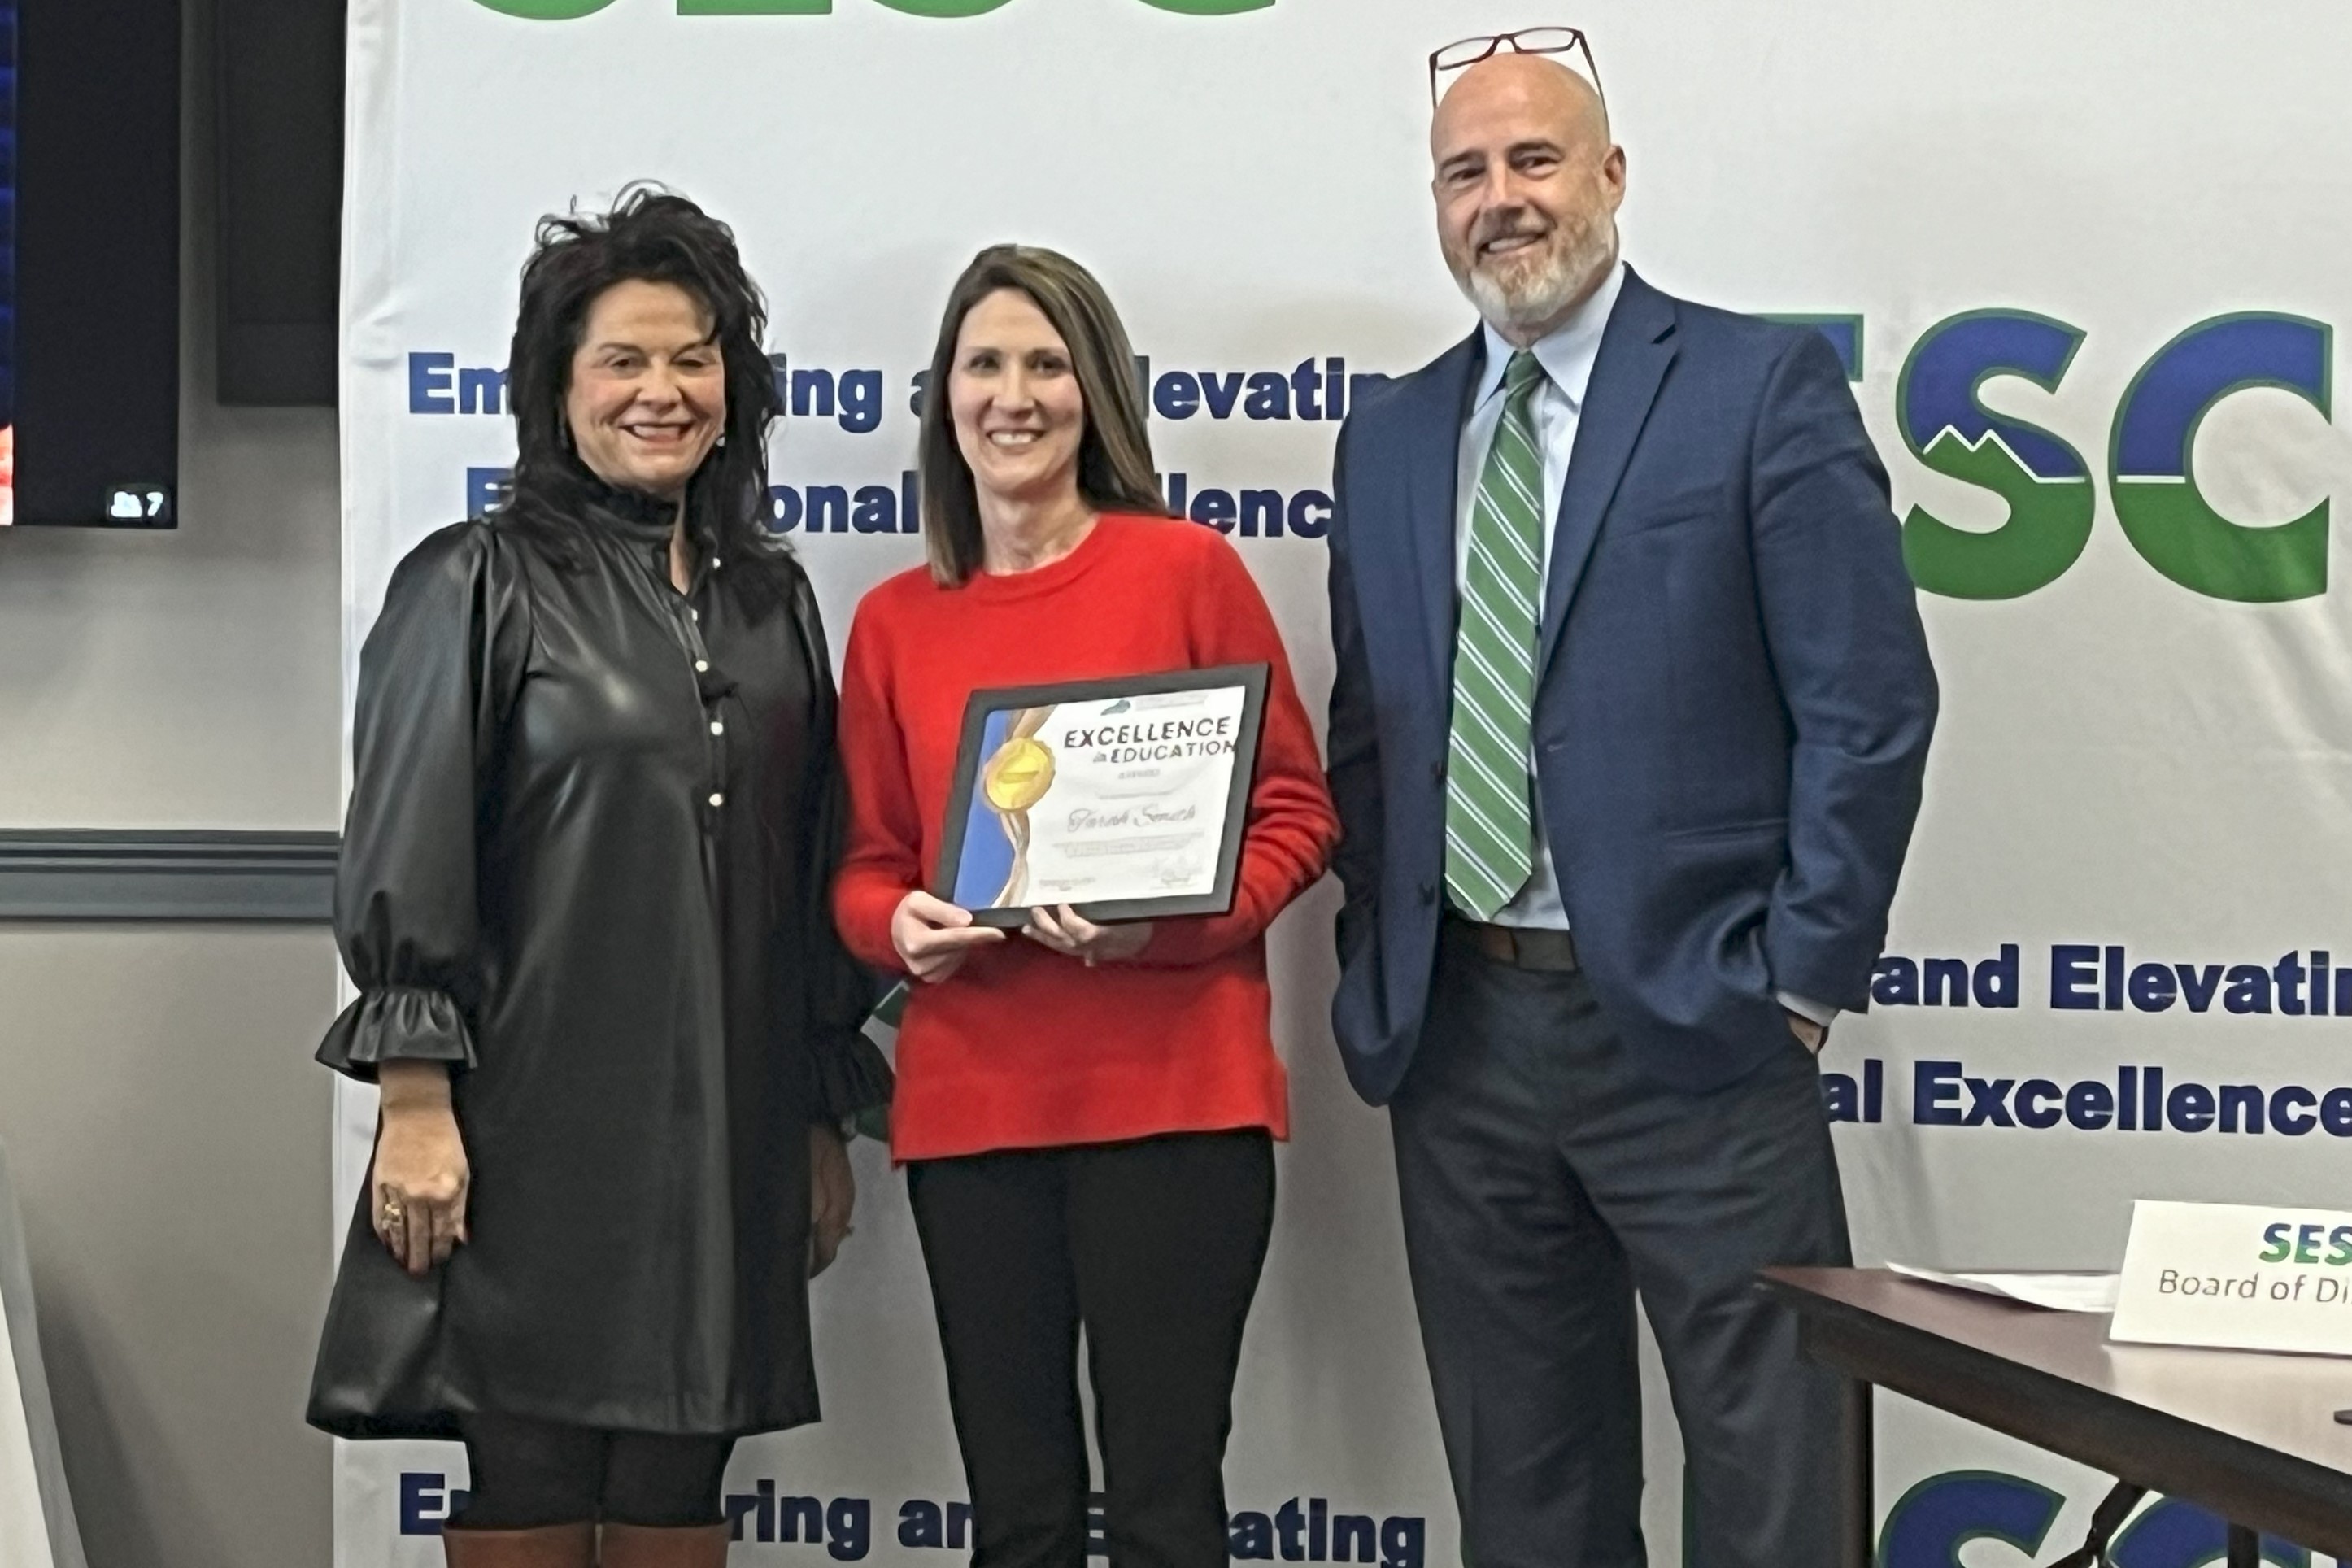 Smith is shown being recognized by SESC education cooperative